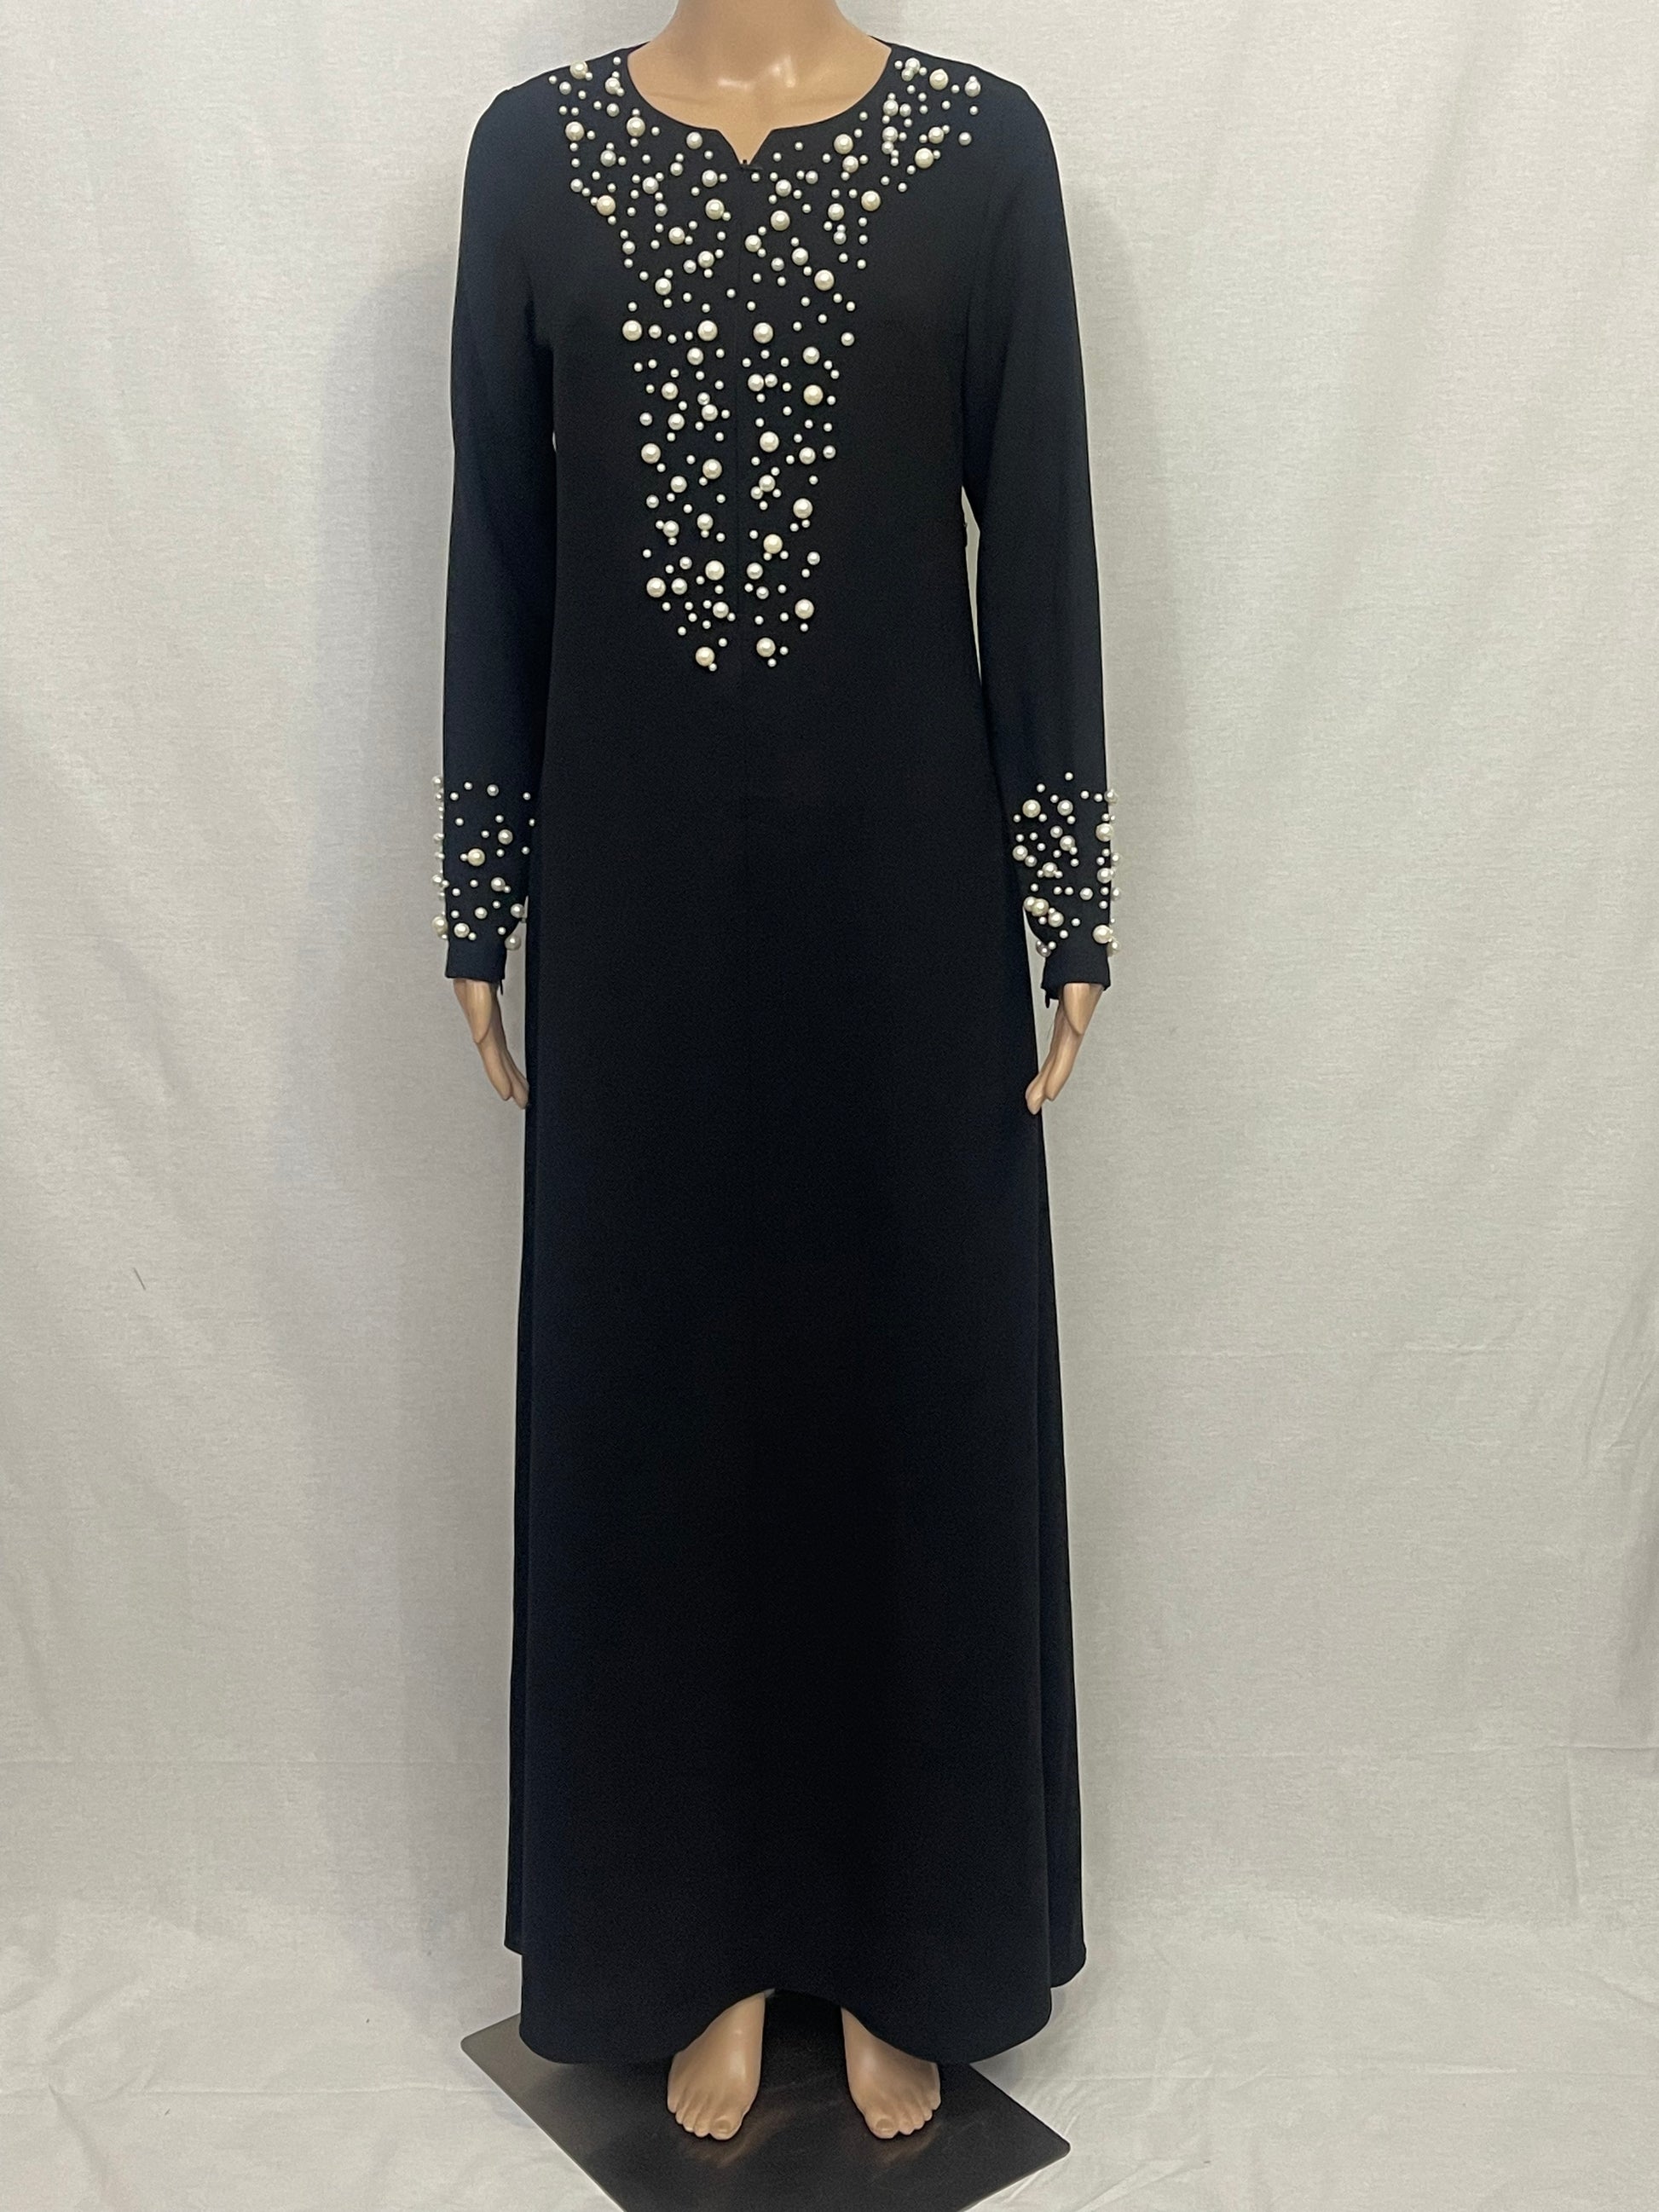 Pearl Modest Dress Black - Asiyah's Collection